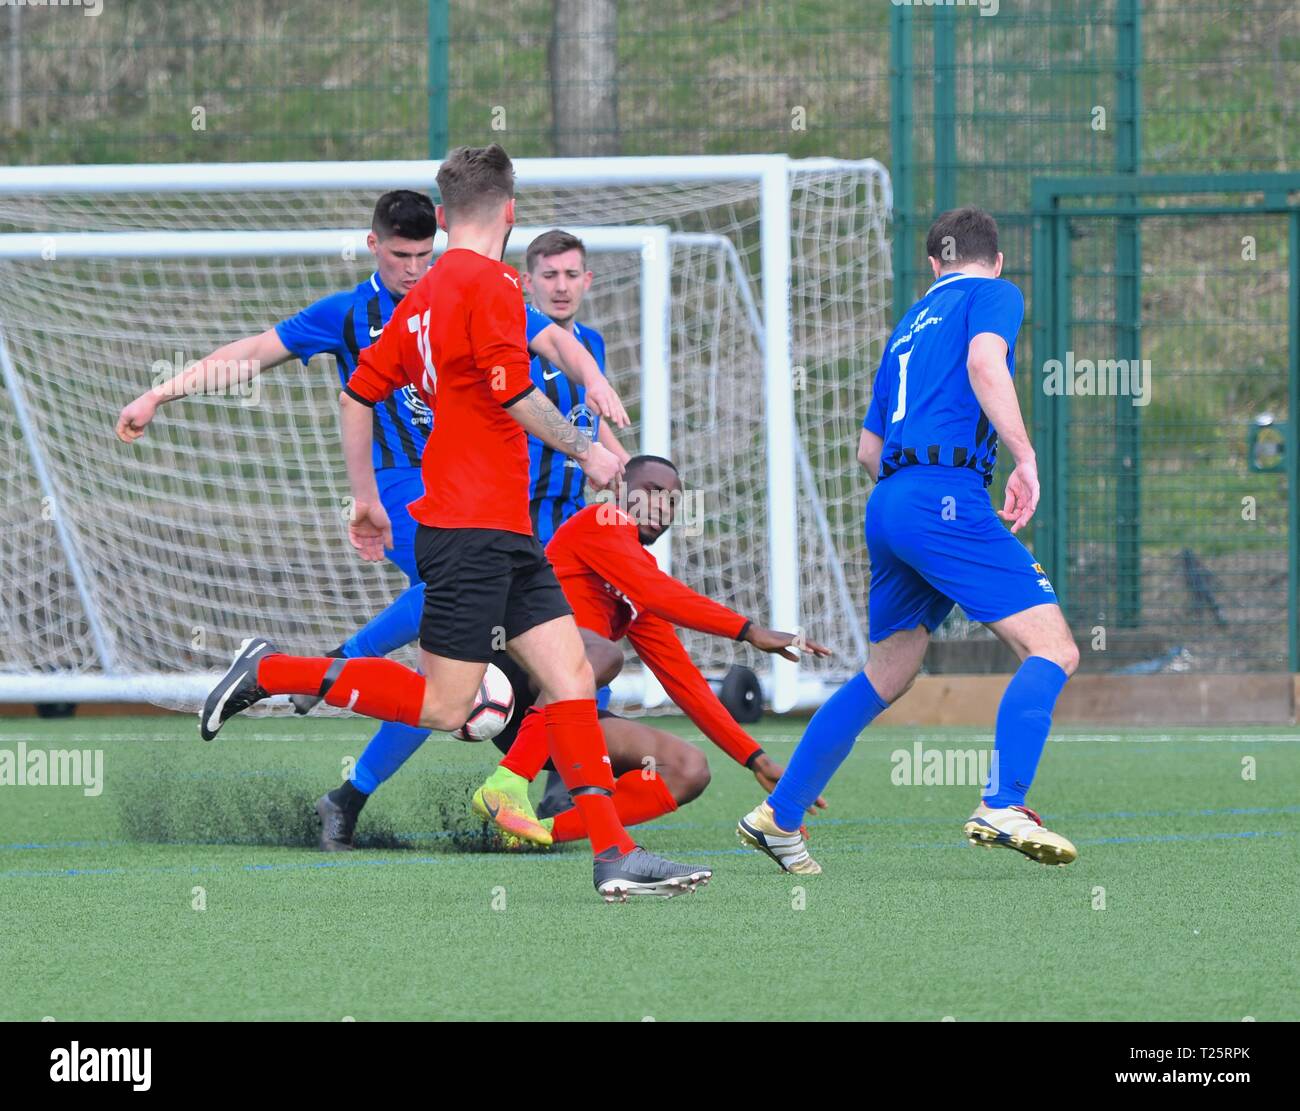 Football action in the  amateur match between Tintwistle Athletic (in blue) and Wilmslow Albion (in red). Stock Photo